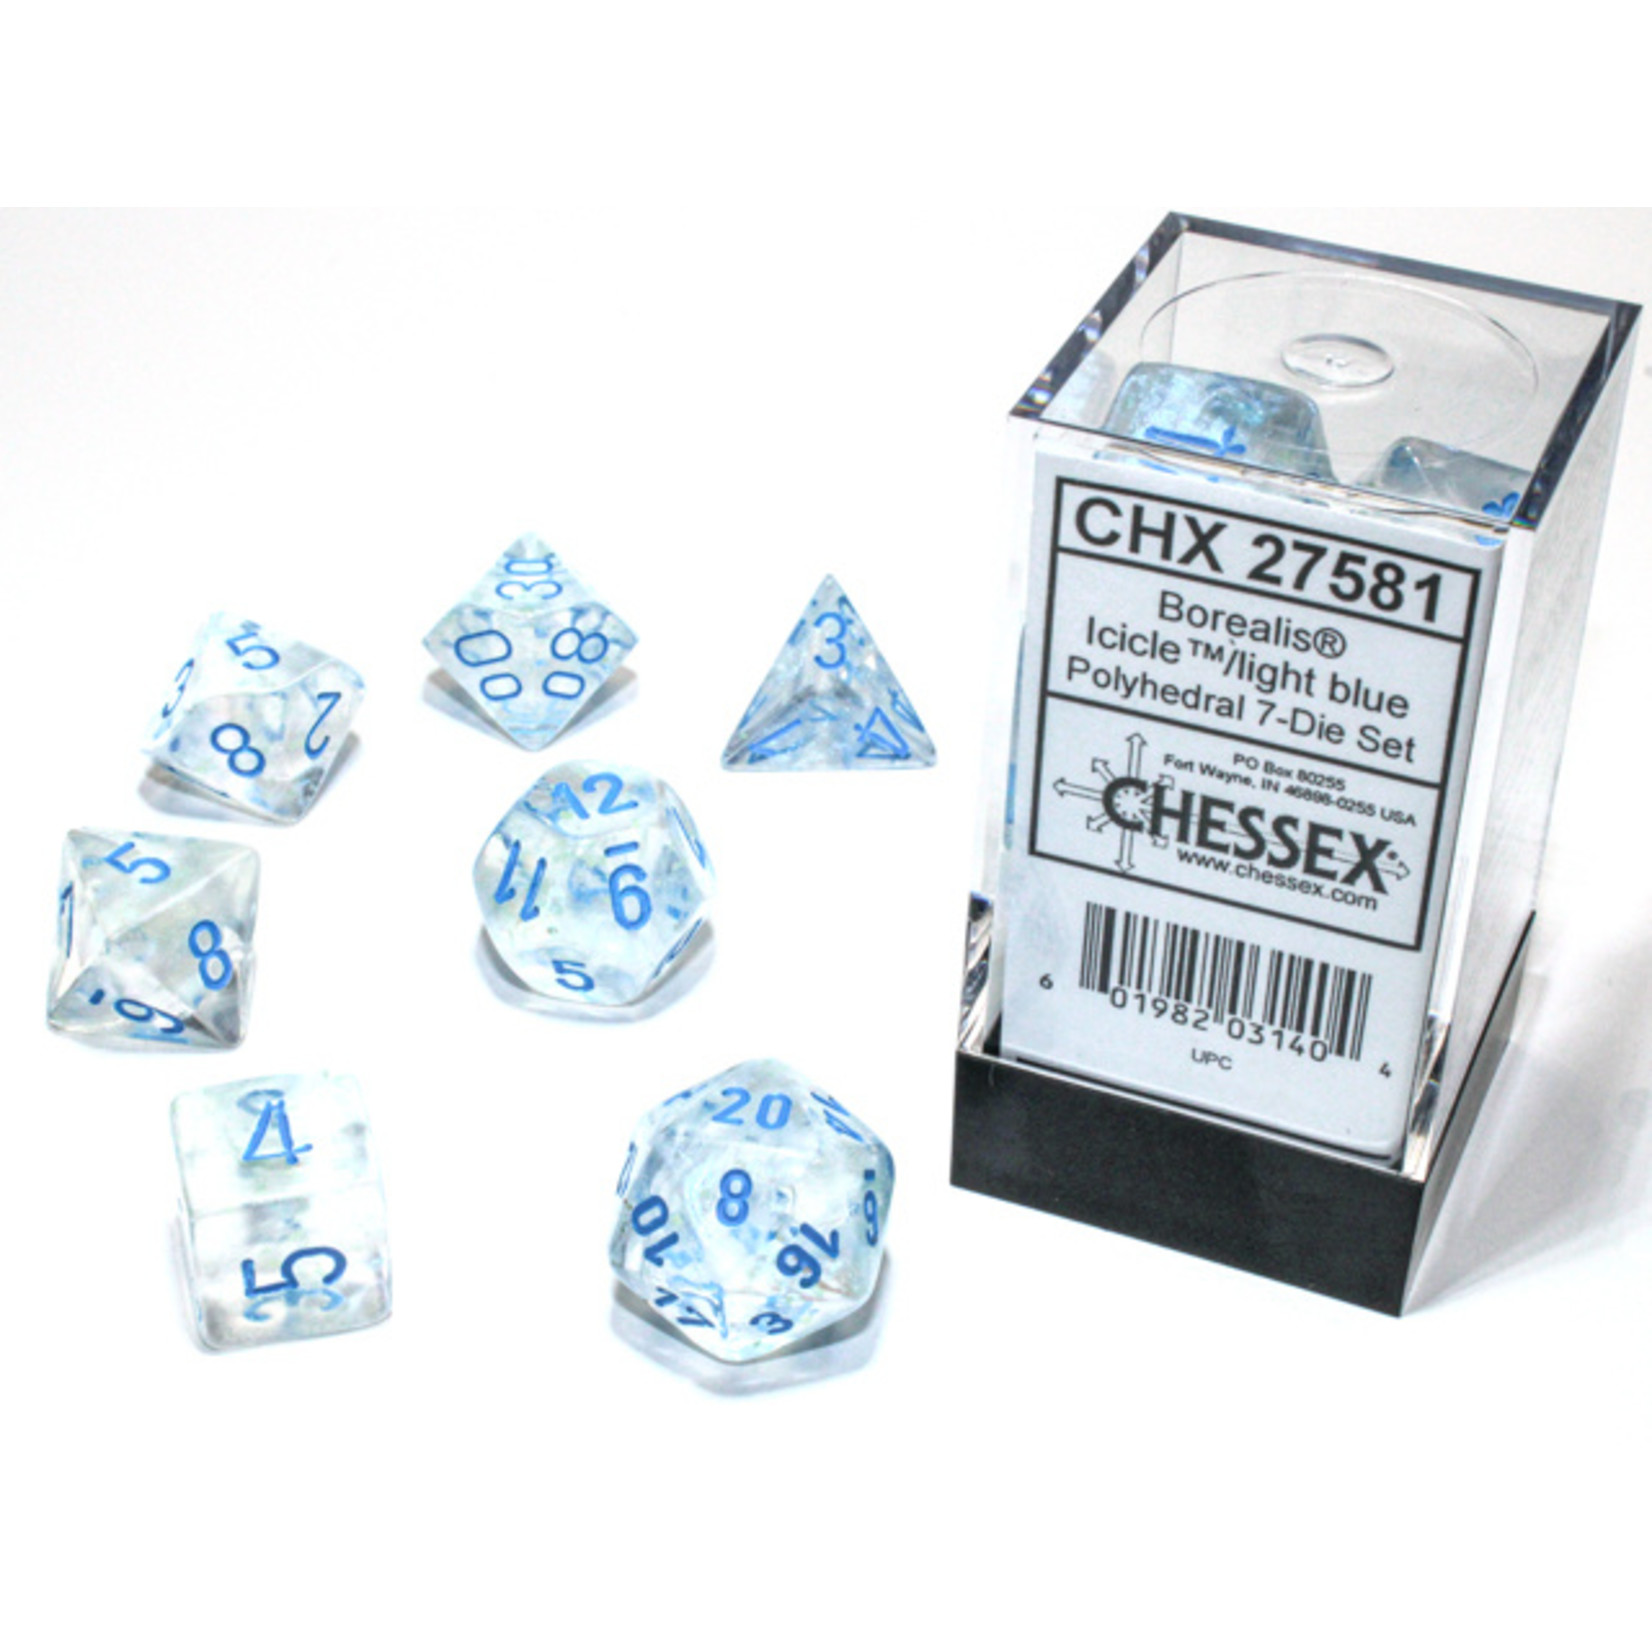 Chessex 27581 Borealis Icicle with Light Blue 7-Set